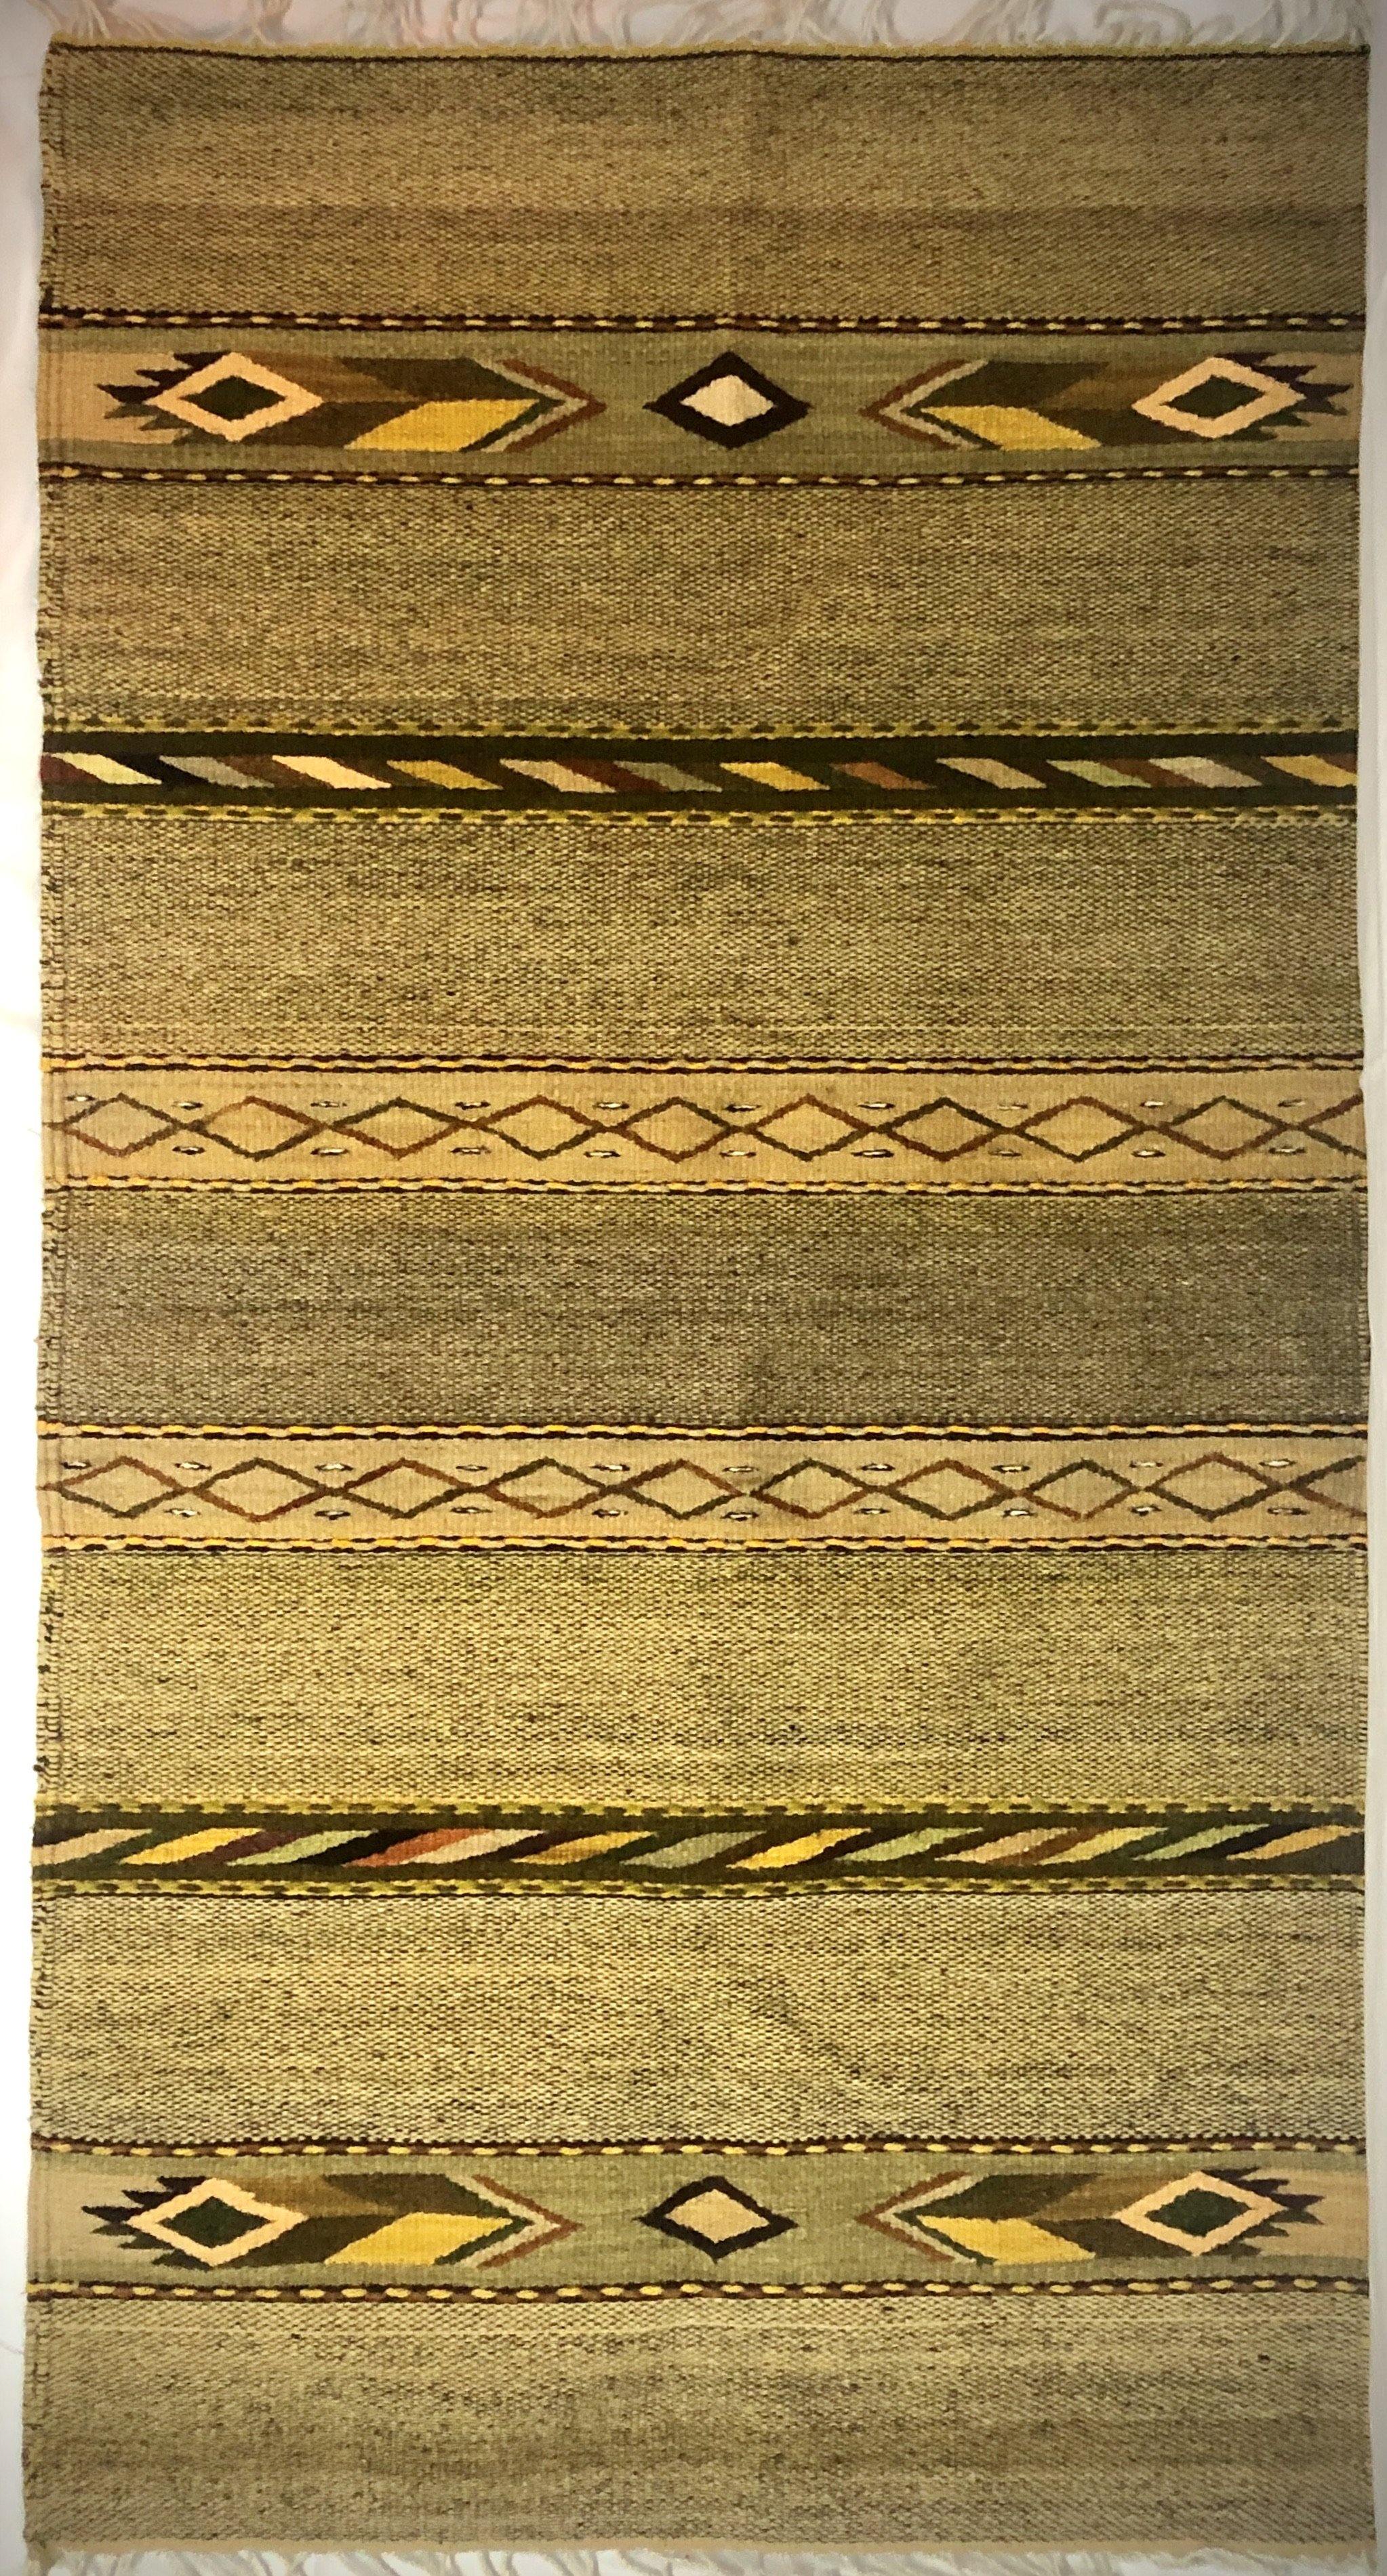 Authentic, Natural-Dyed Zapotec Rombos Rallados Rug - HomageMade 